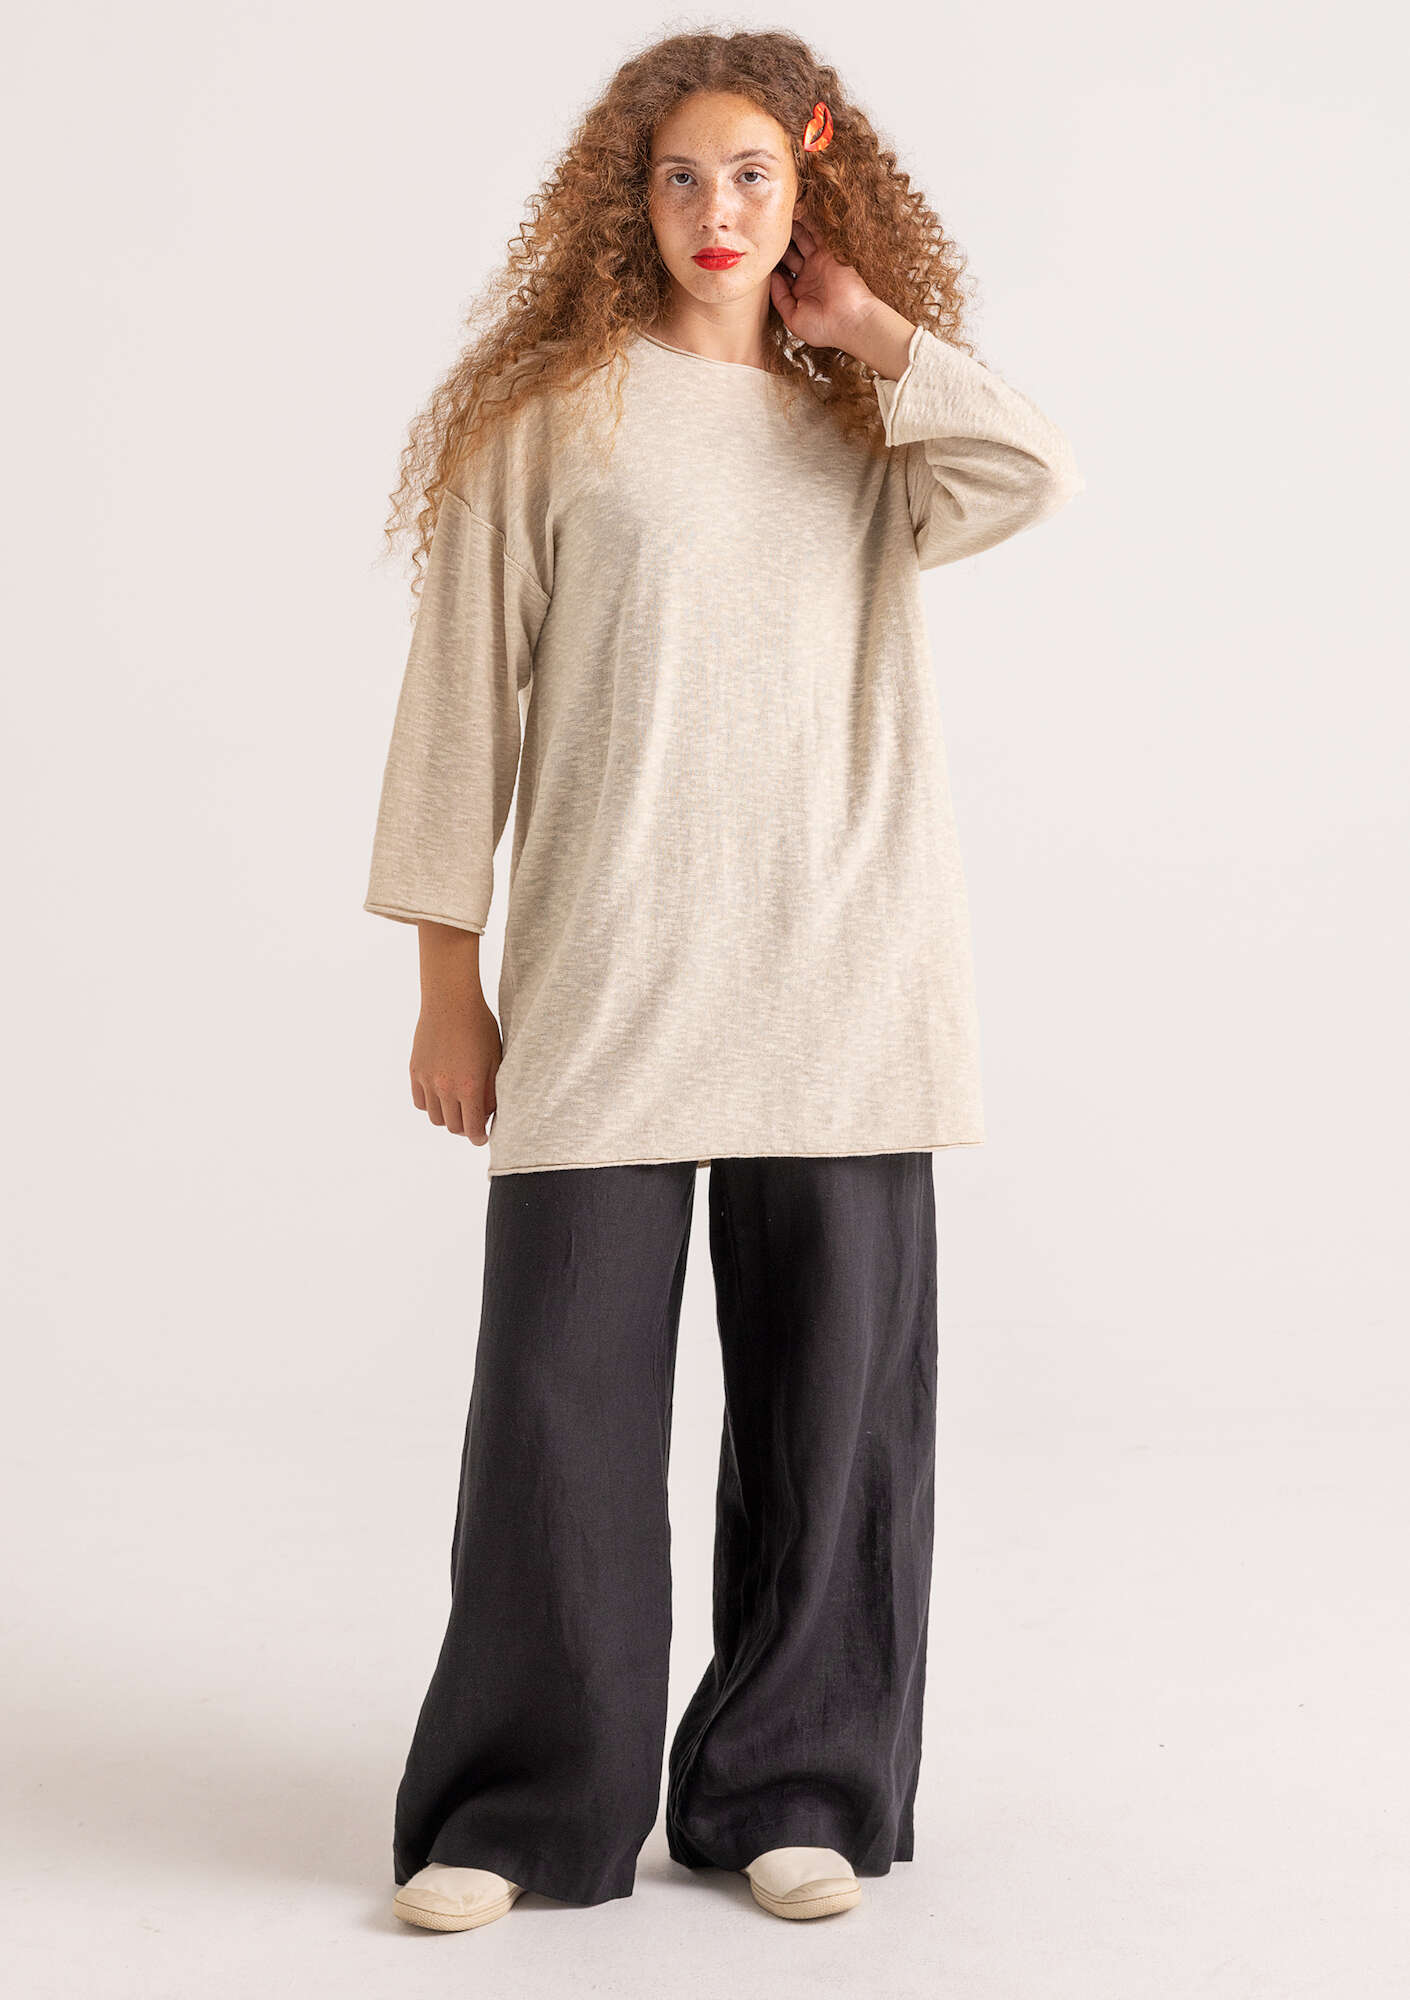 Knit long sweater in linen/organic cotton undyed